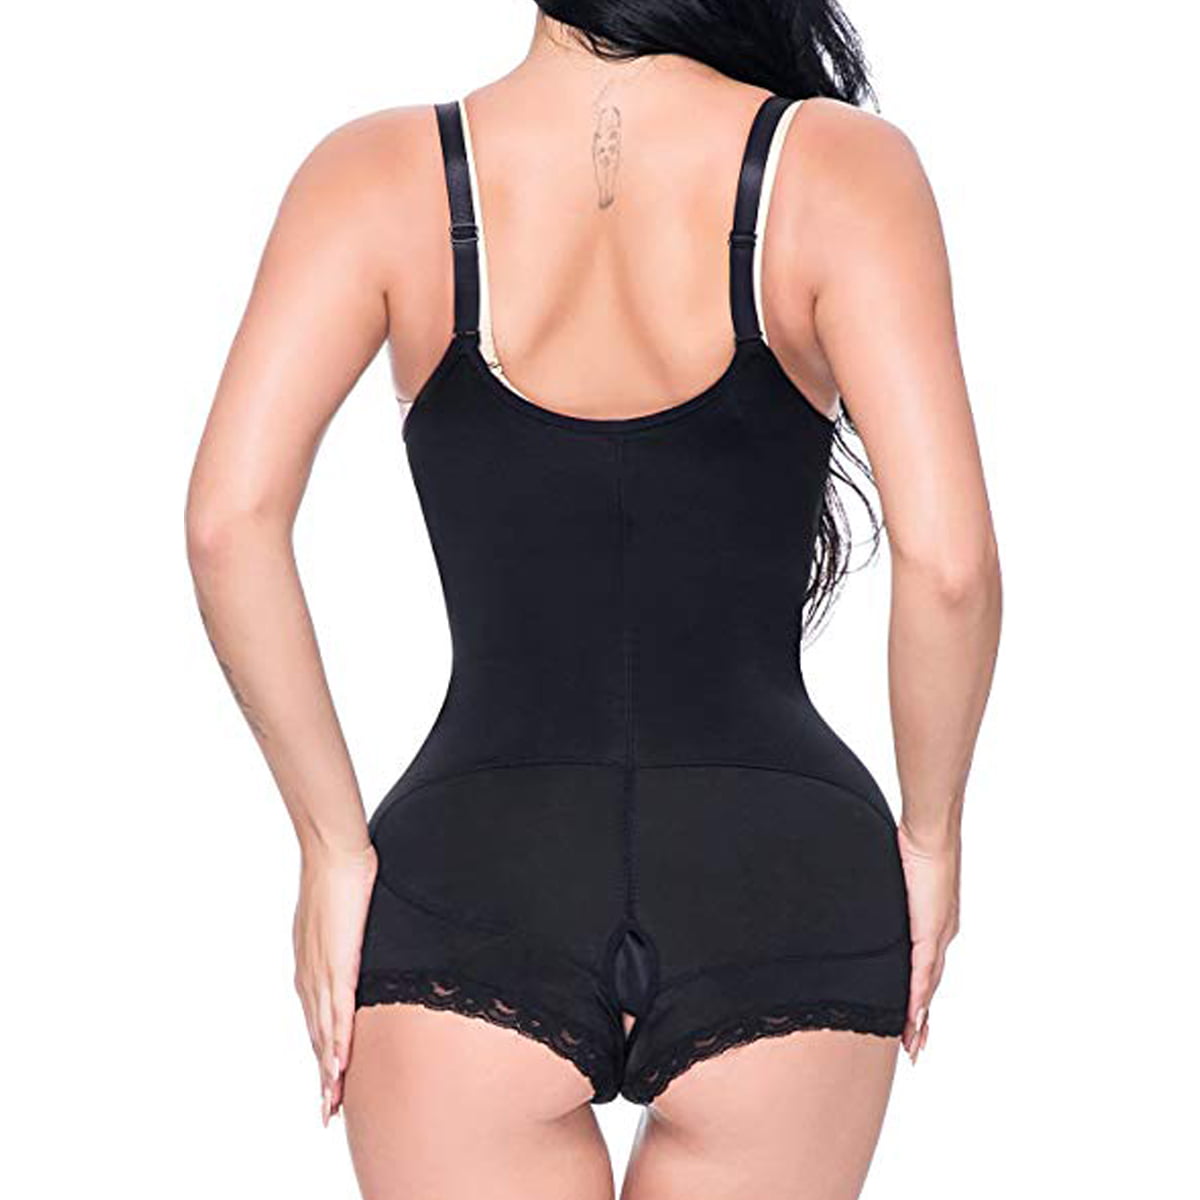 SLIMBELLE® Women Seamless Shaping Bodysuit with Adjustables Straps Shapewear Lingerie Slimming Body Shaper Firm Tummy Control